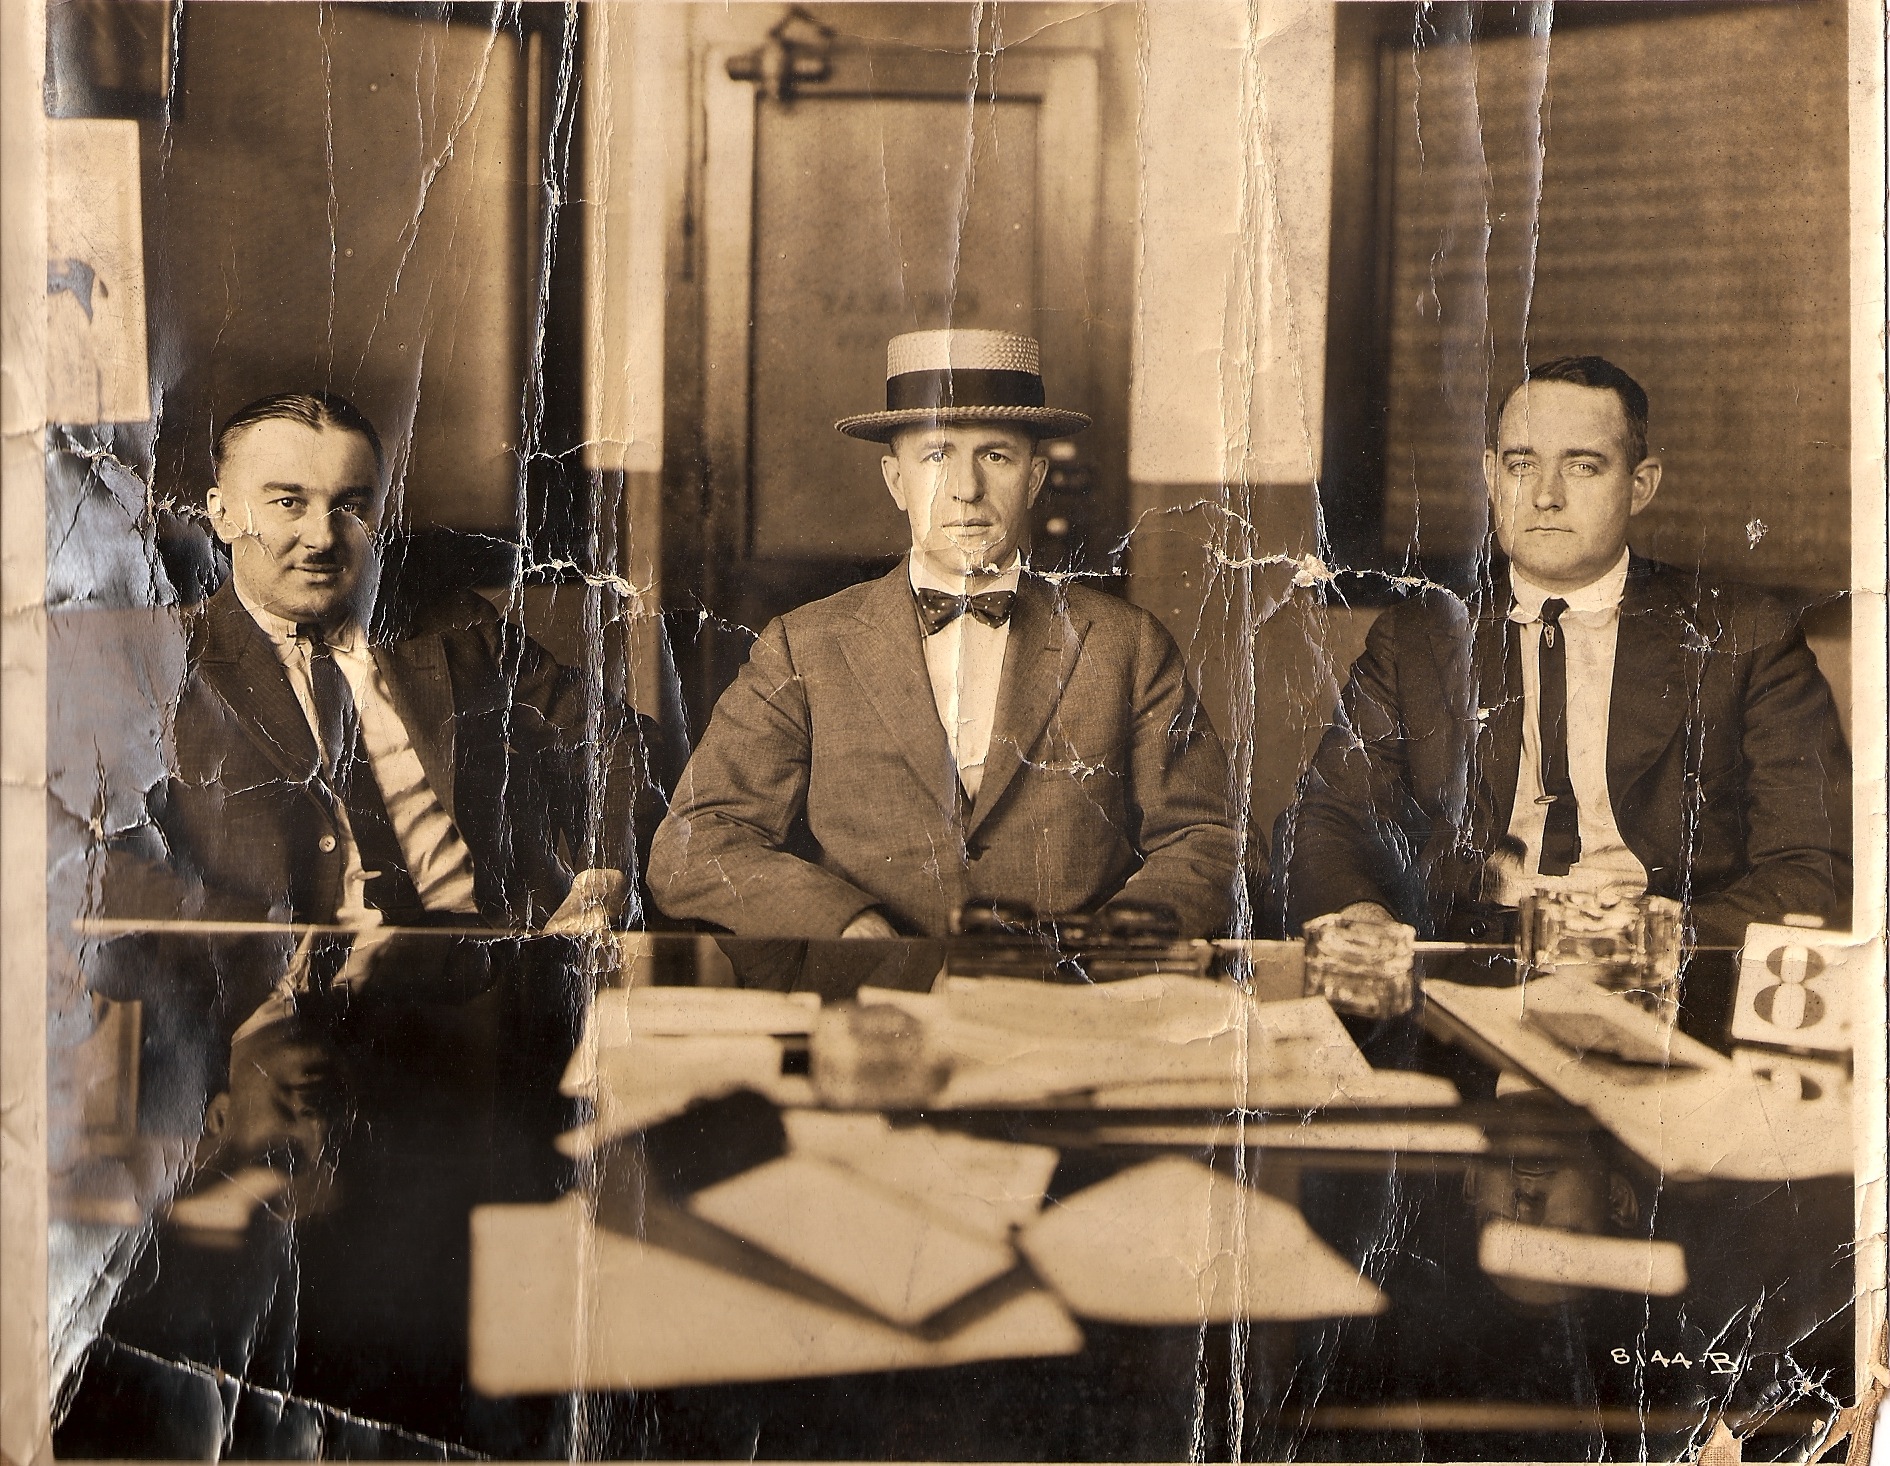 Thomas B. Hogan of the Yellow Cab Company, Chicago Illinois is seated at the center of the photograph. 